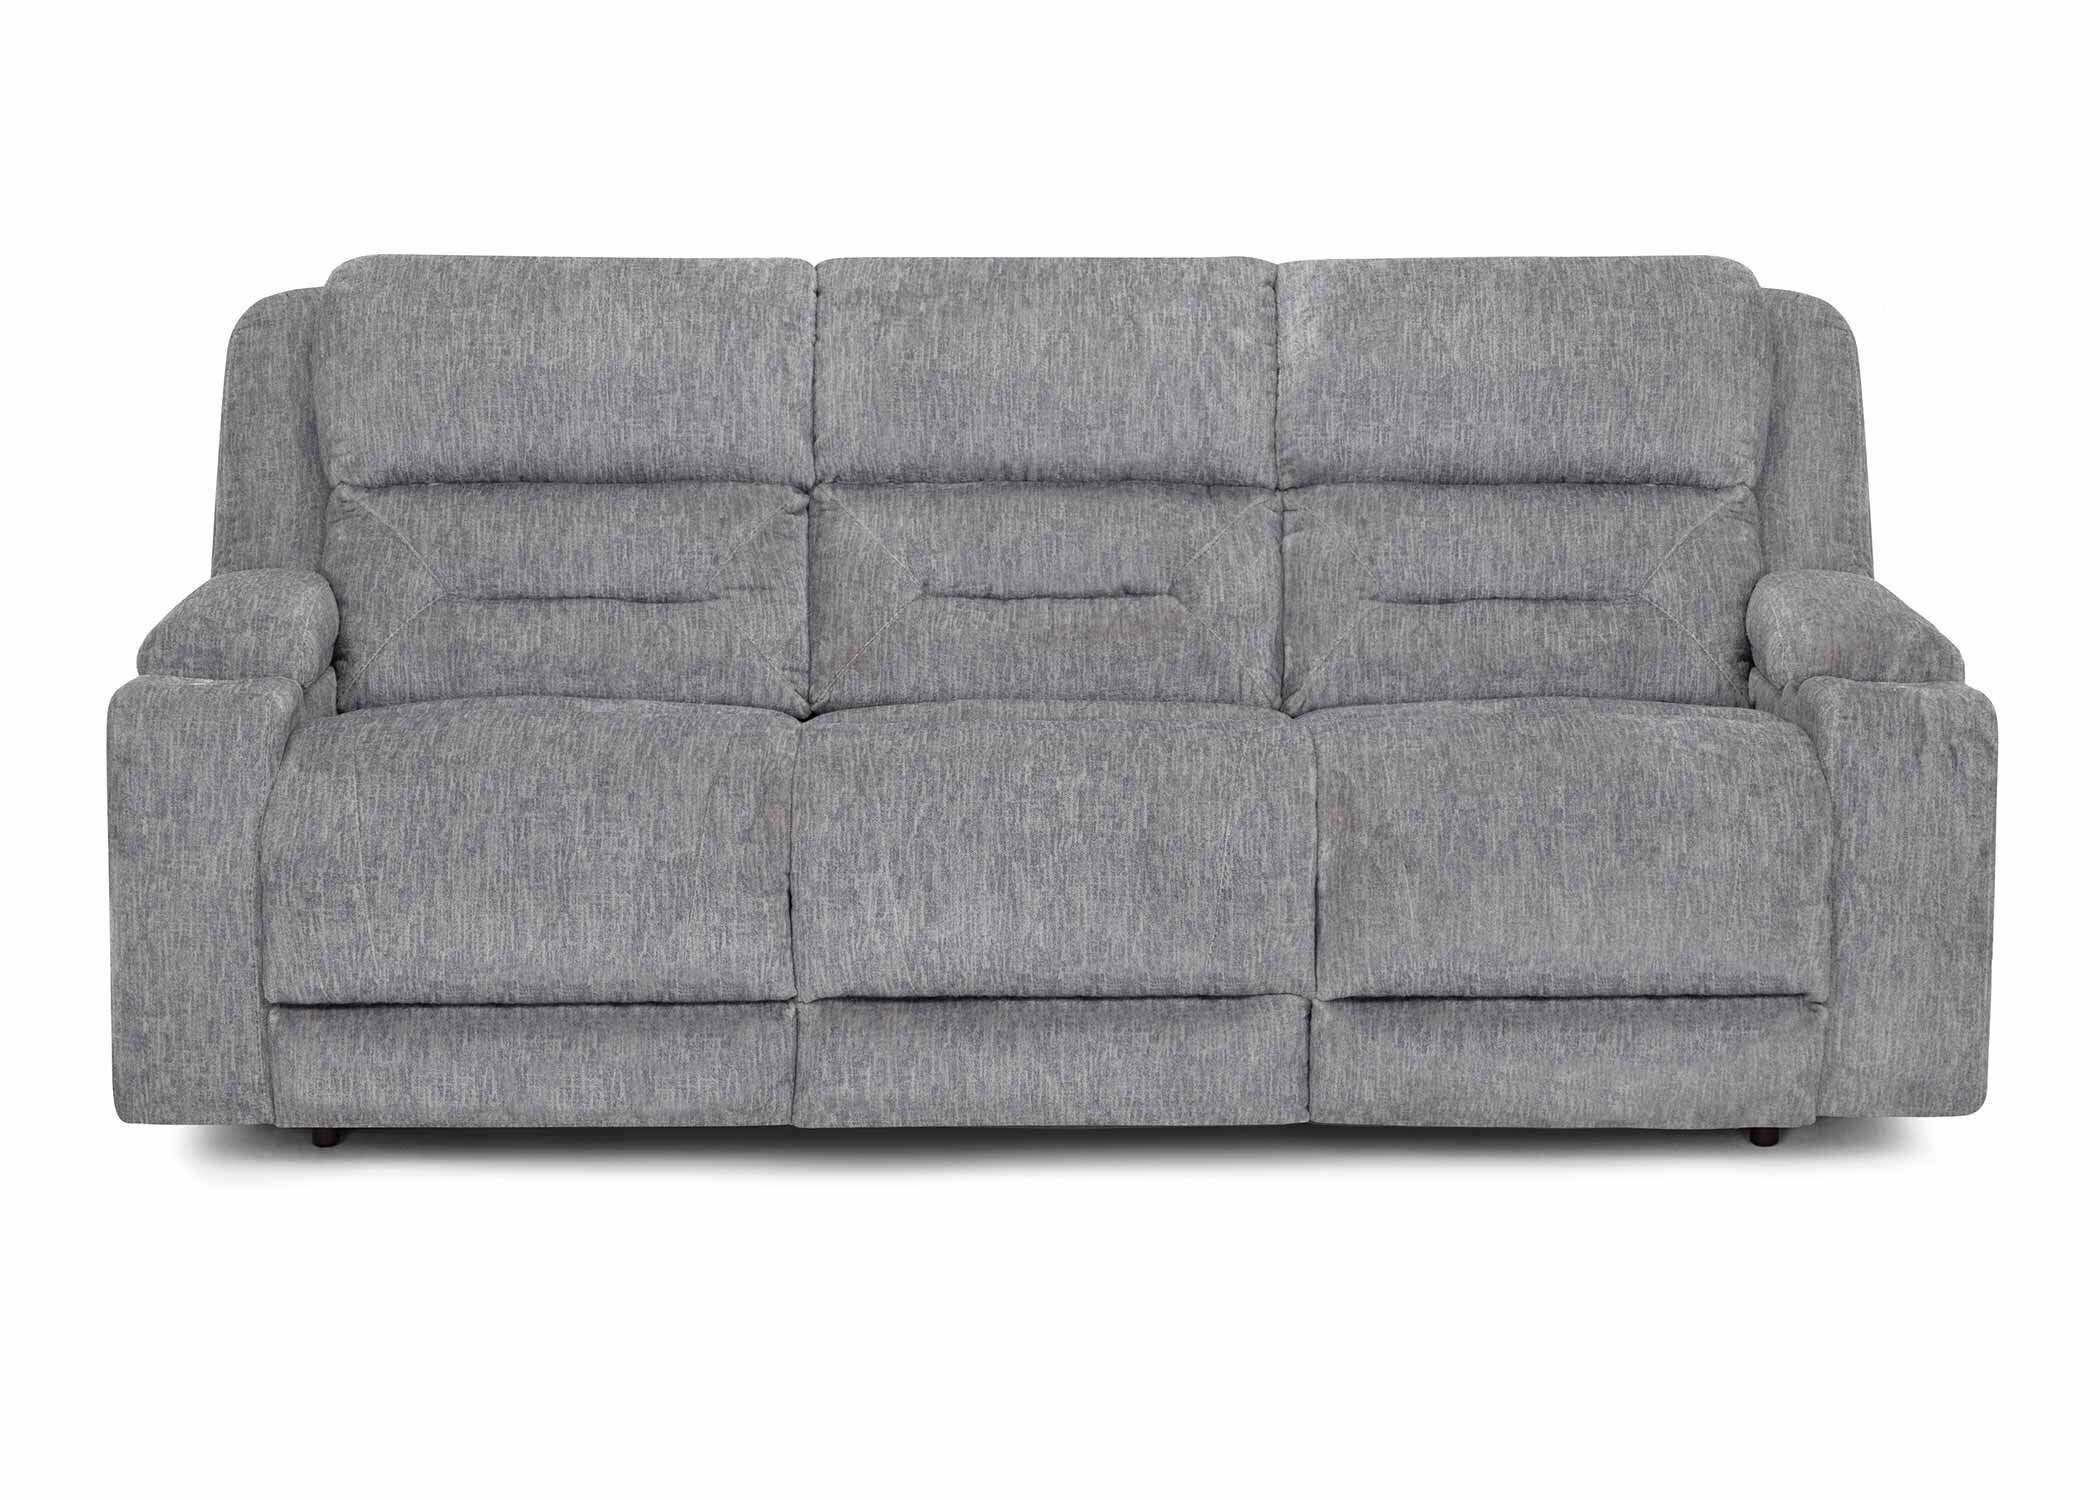  65247 Ace Reclining Sofa in 1015-06 Plush Gray - Front 